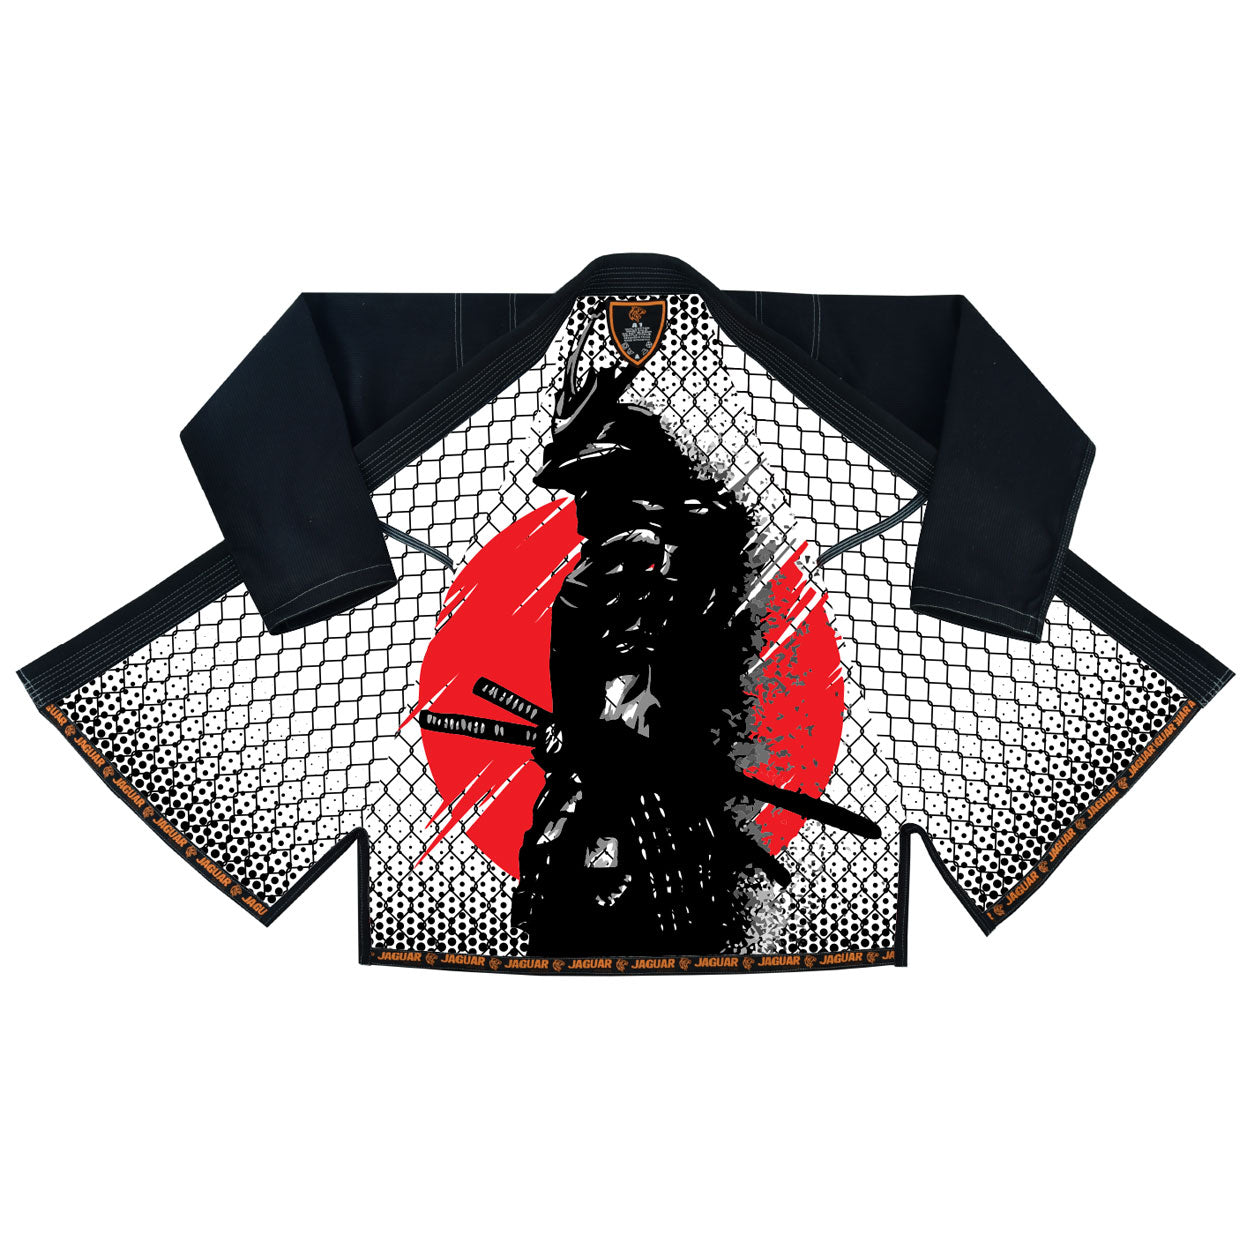 The Martial Artist 3 Competition BJJ Gi – Dynasty Clothing